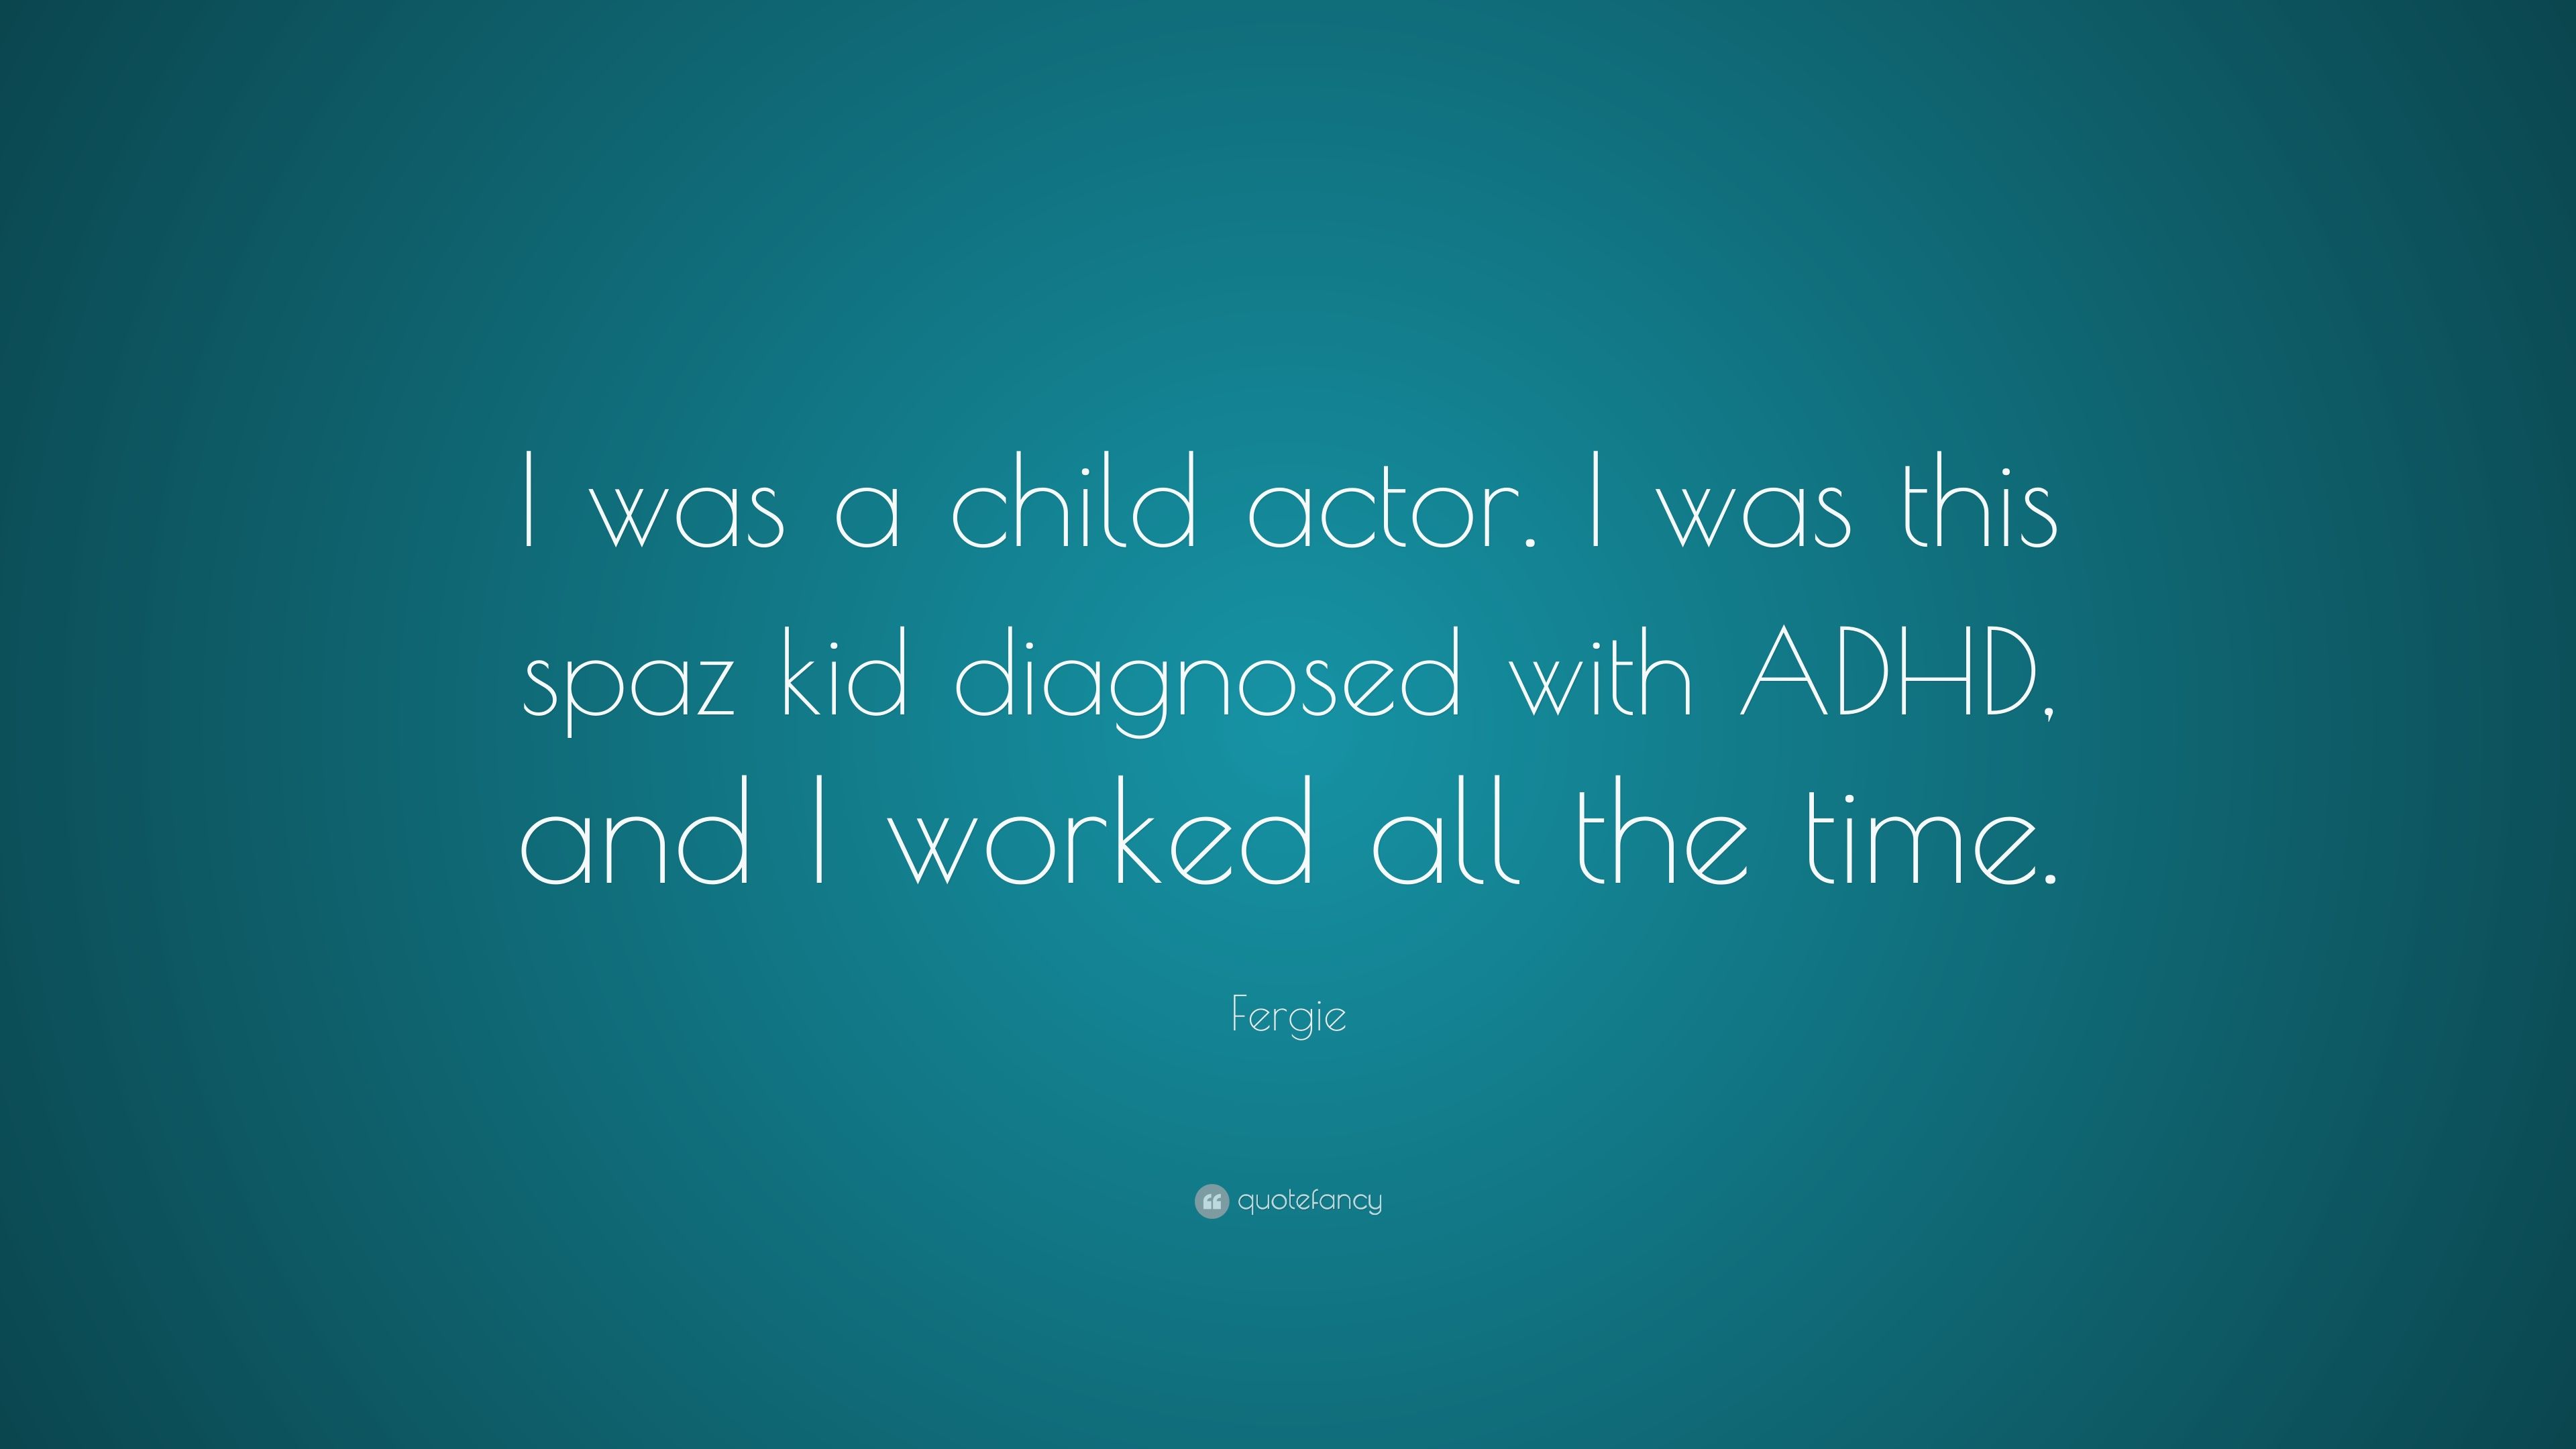 Fergie Quote: “I was a child actor. I was this spaz kid diagnosed